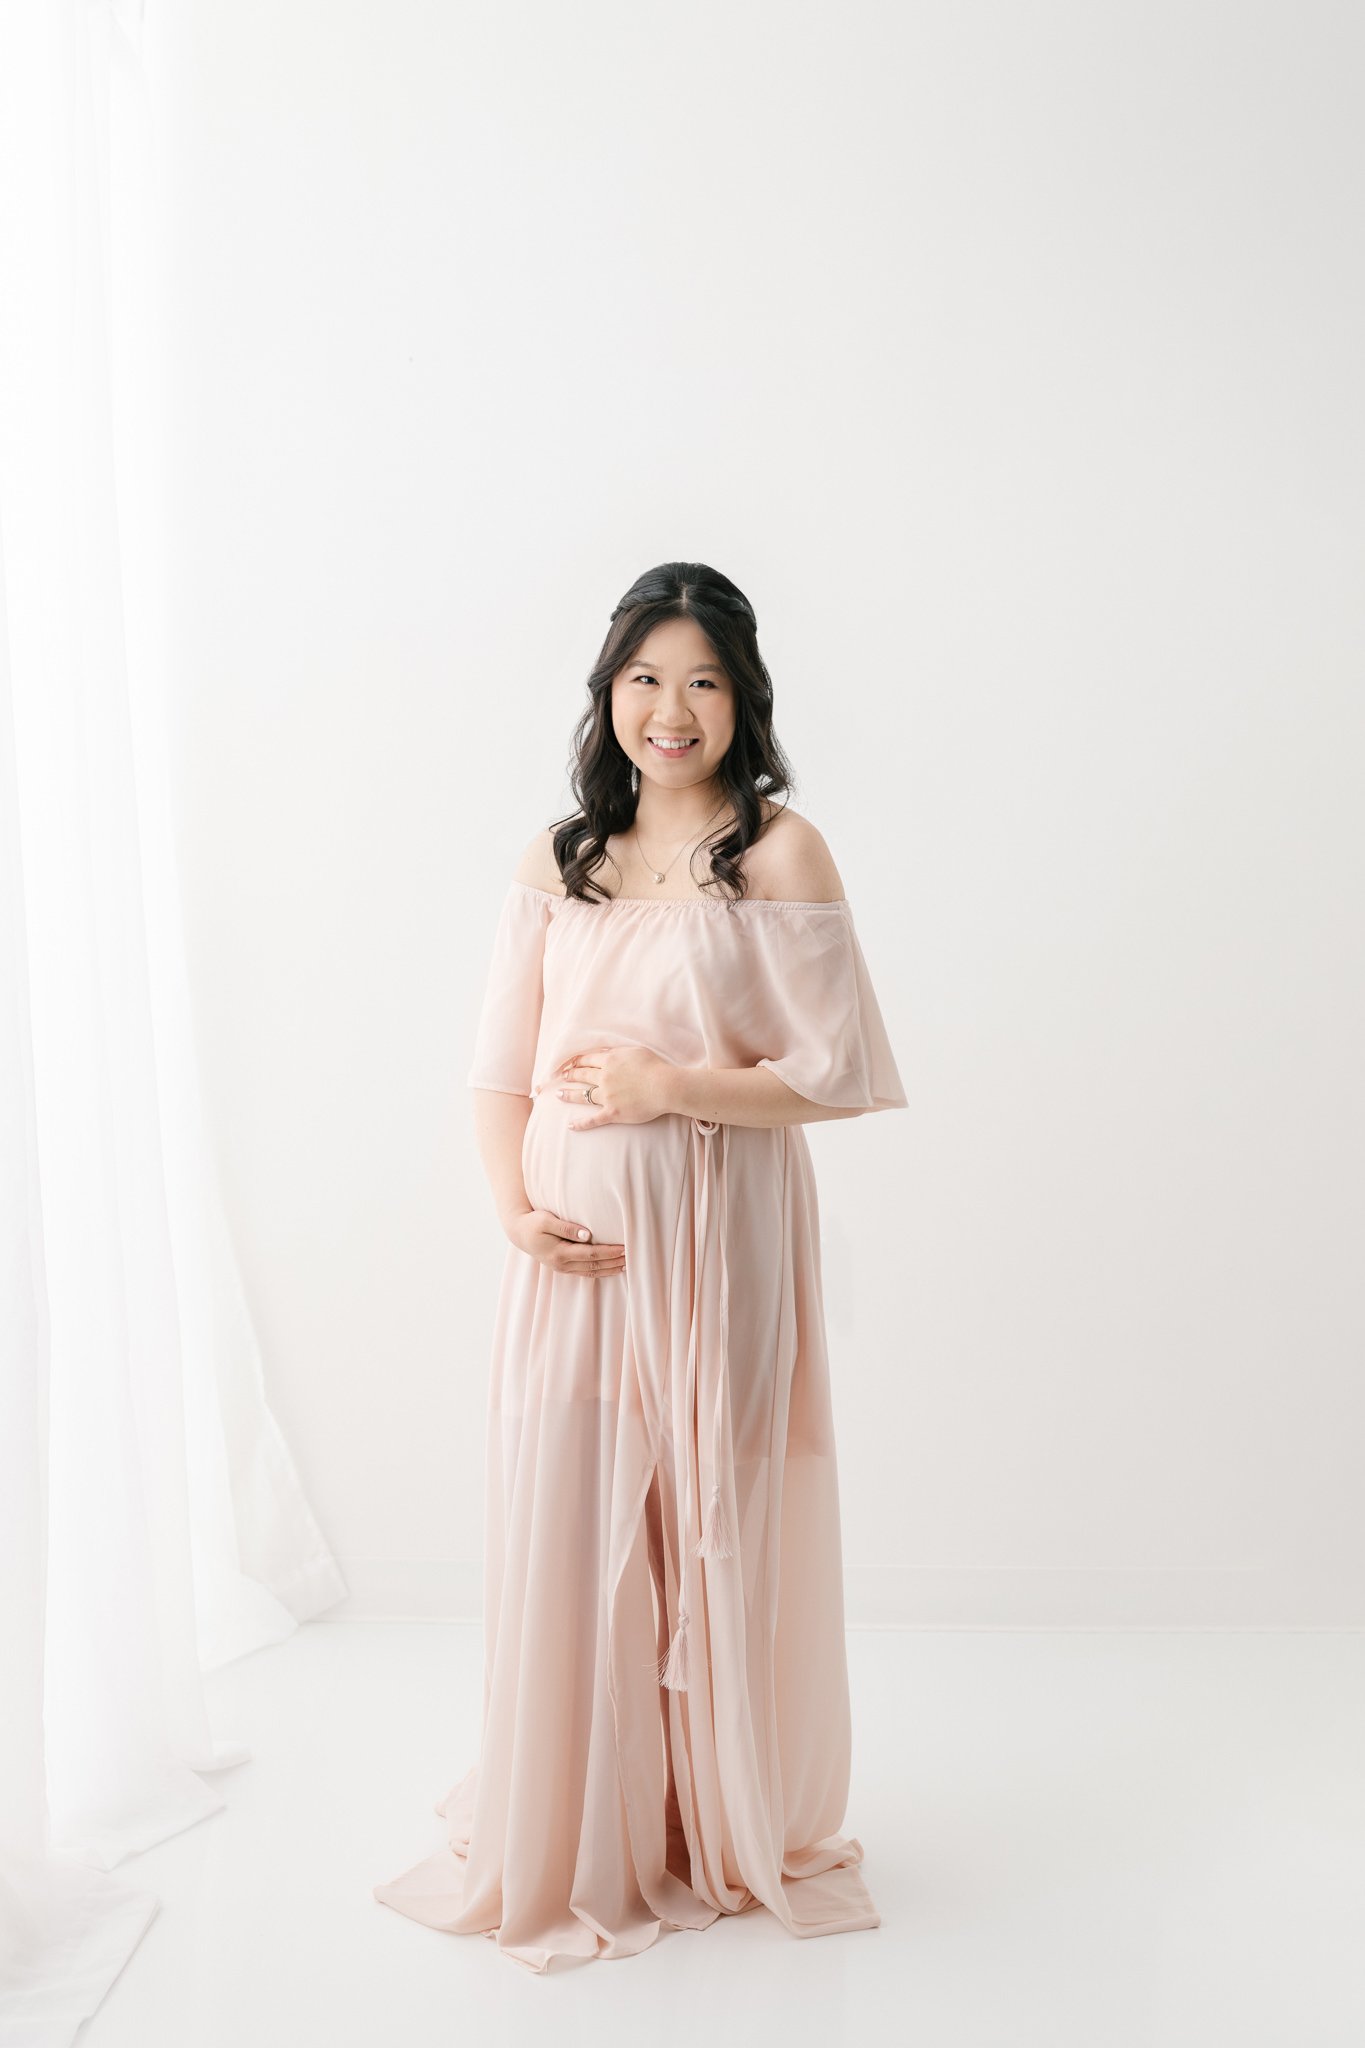  The timeless maternity portrait was taken at an all-white studio by Nicole Hawkins photography. heirloom maternity portraits timeless all-white #NicoleHawkinsPhotography #NicoleHawkinsMaternity #MaternityPhotography #Maternitystyle #NJMaternity #Tim